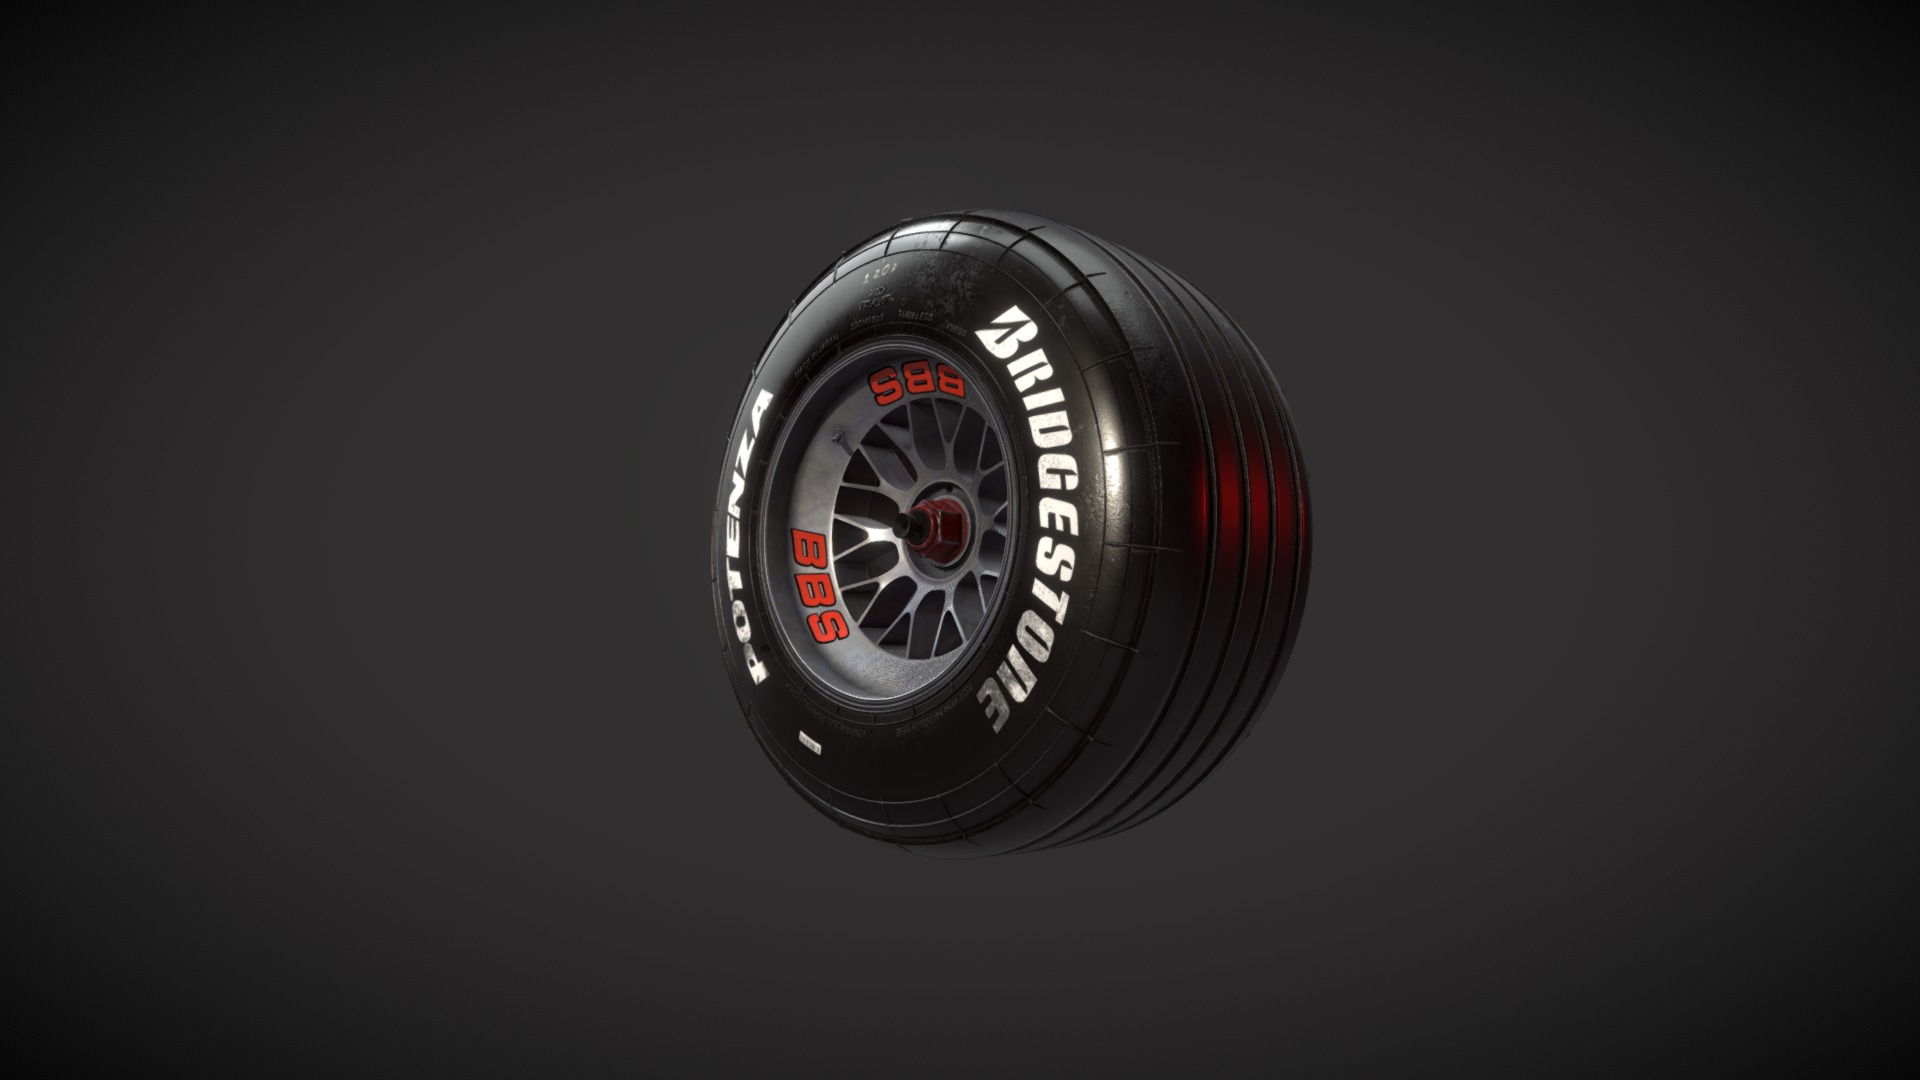 3D model F1 – 2000 – Wheel - This is a 3D model of the F1 - 2000 - Wheel. The 3D model is about a close up of a watch.